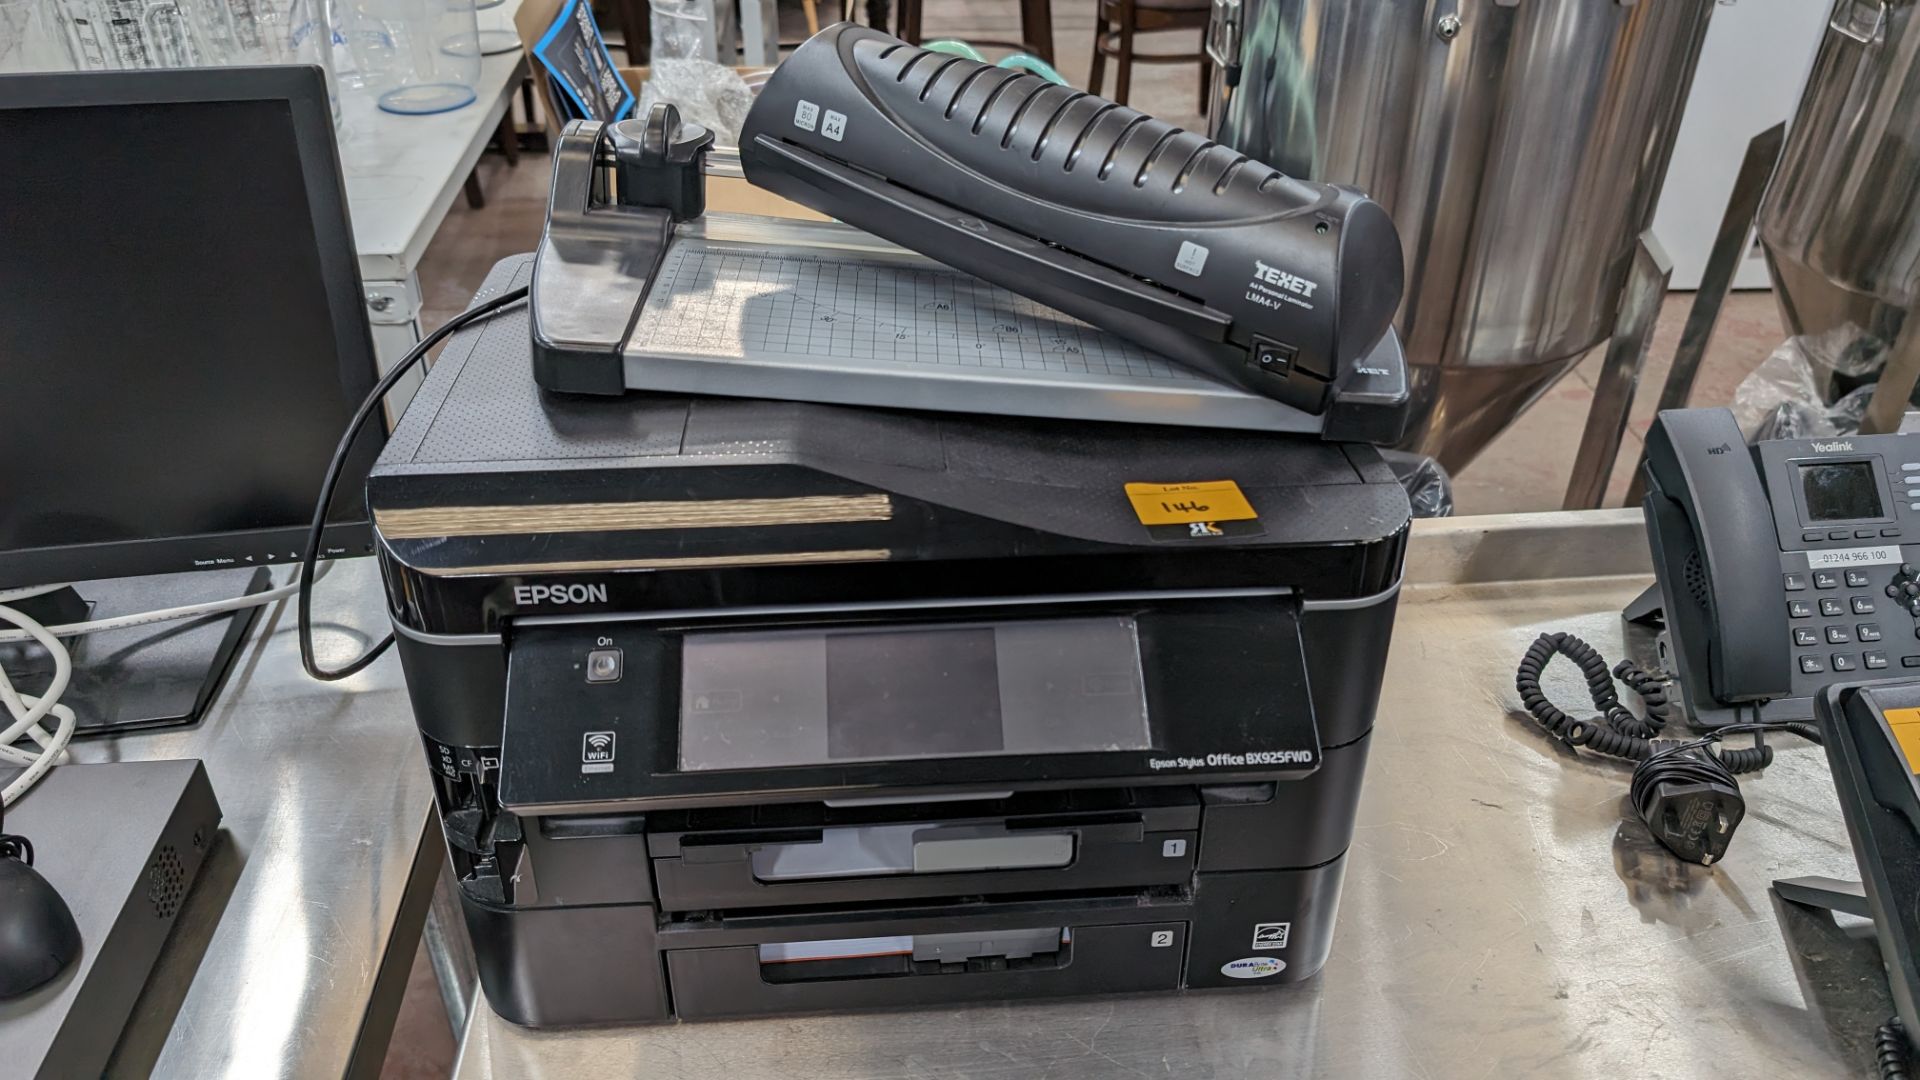 Epson Stylus Office multi-function printer, model BX925FWD, including 2 off paper cassettes, plus of